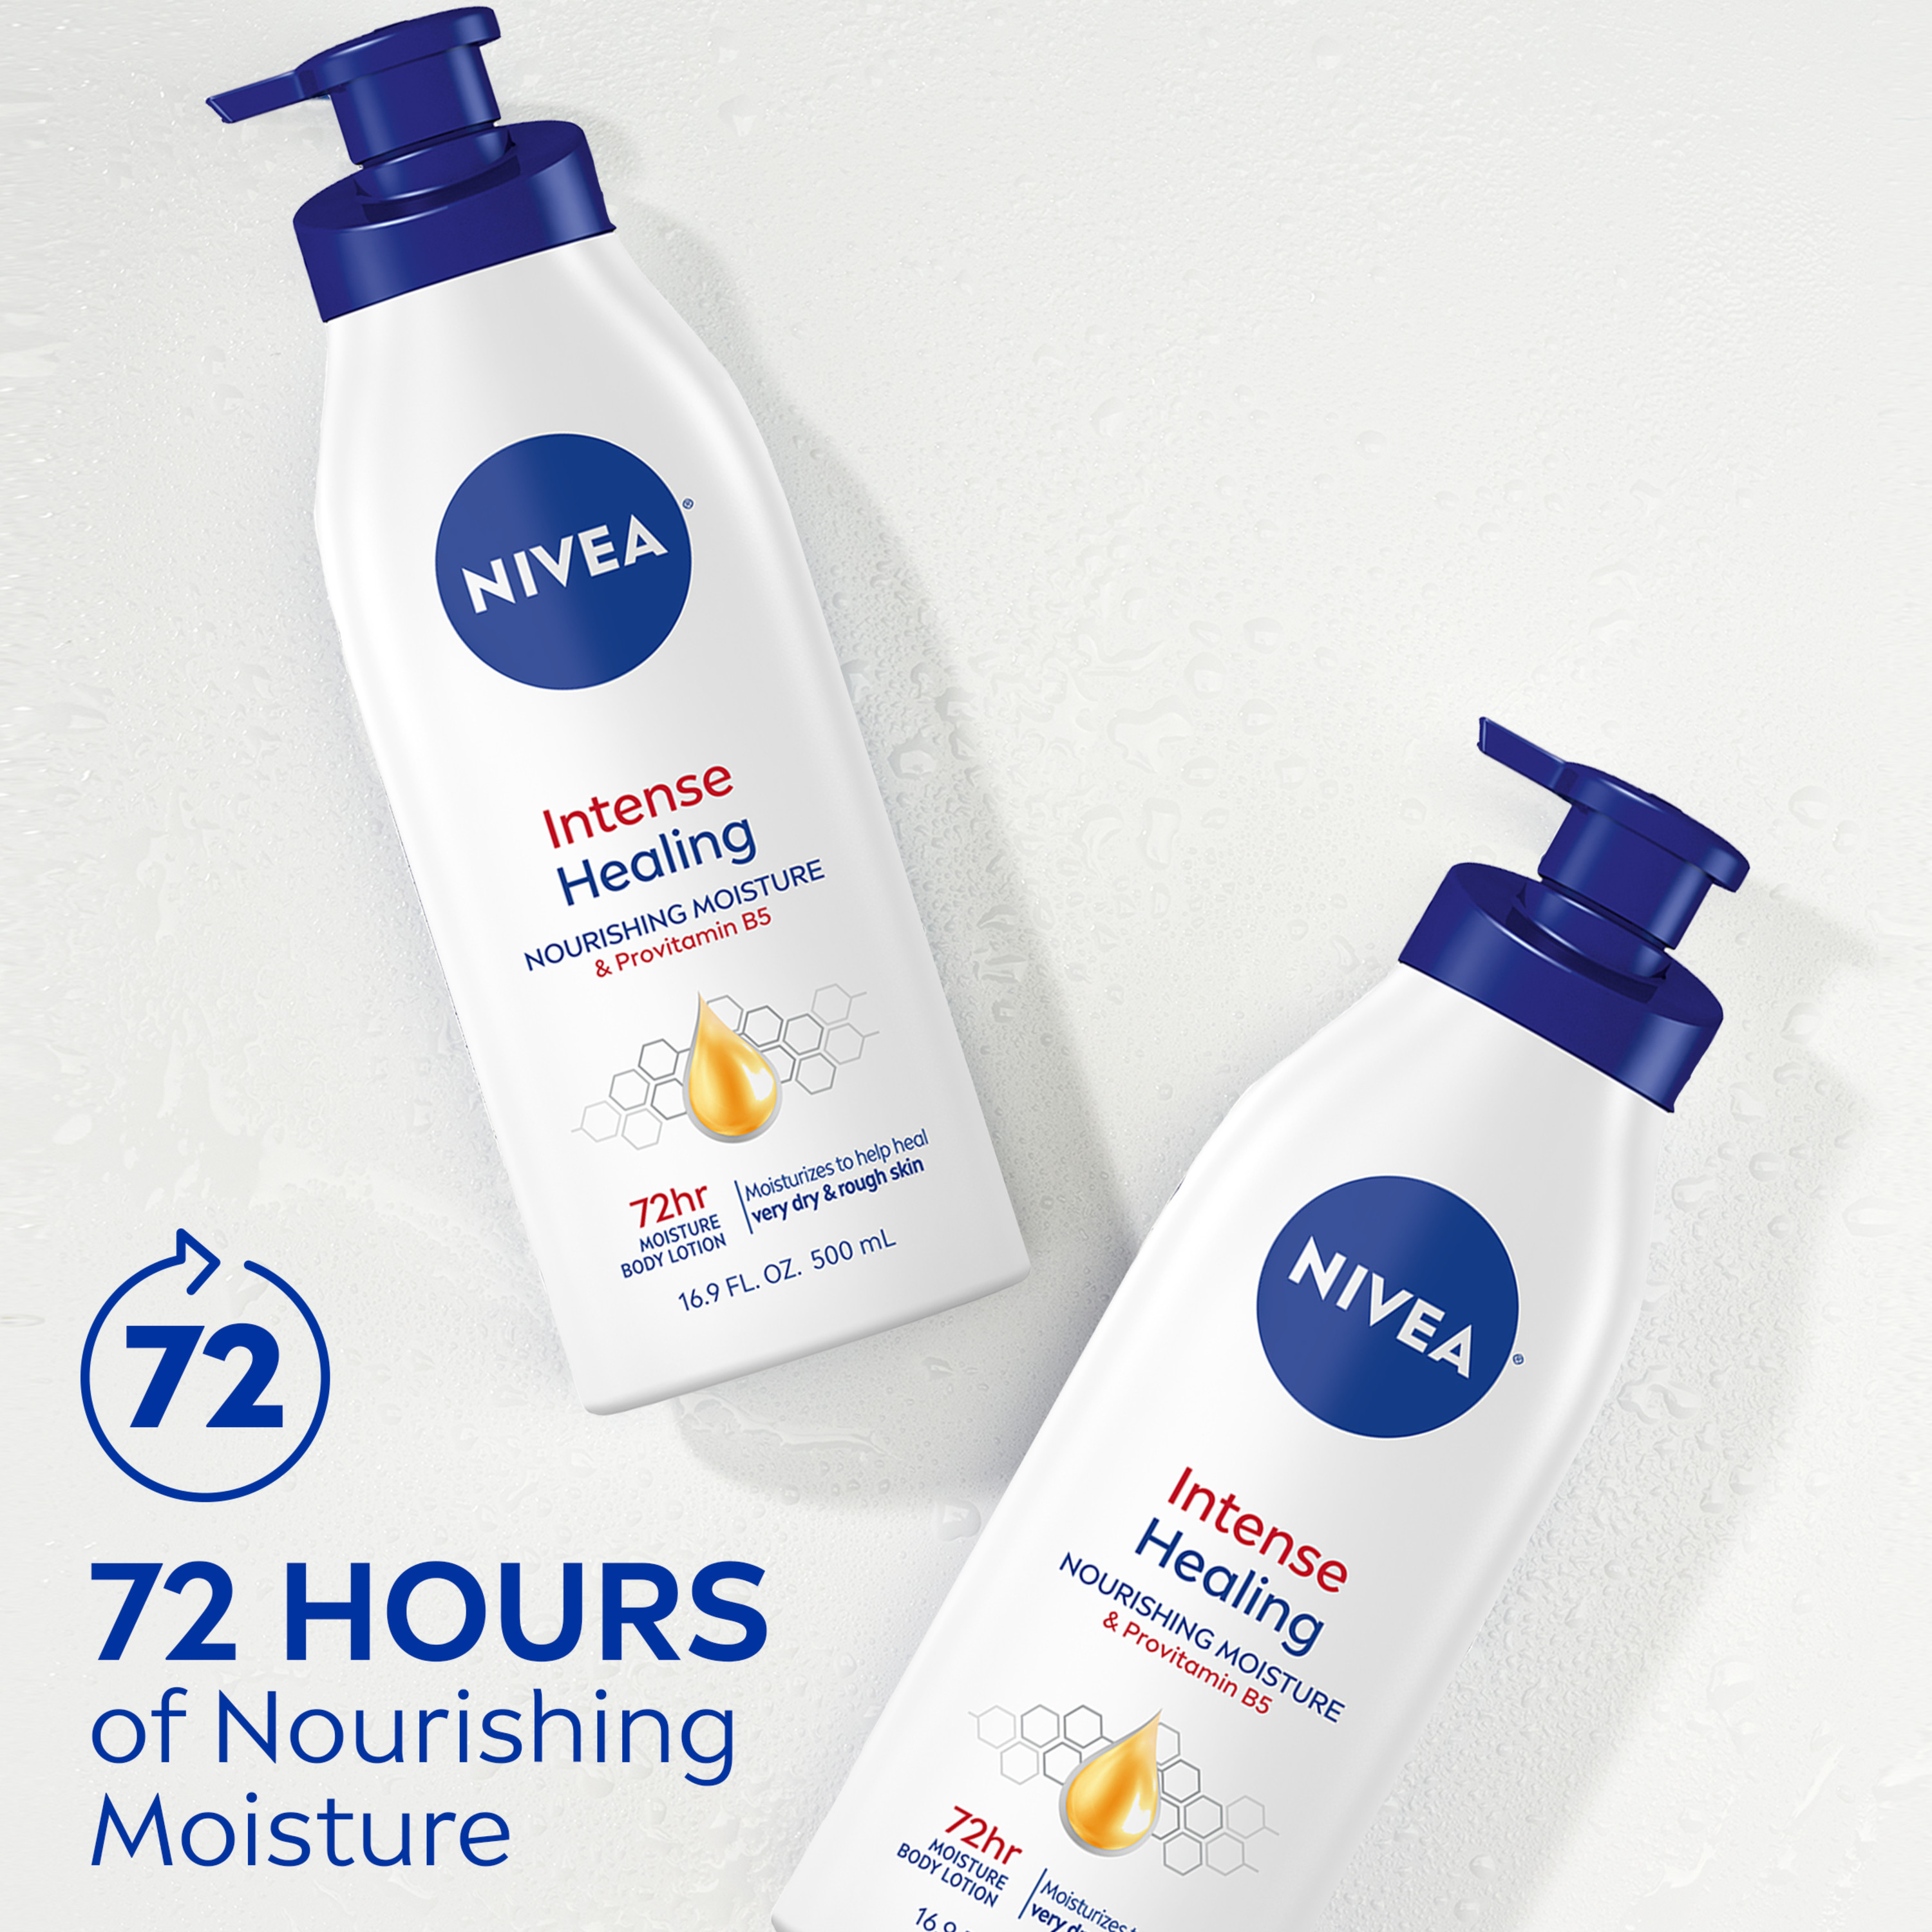 NIVEA Intense Healing Body Lotion, 72 Hour Moisture for Dry to Very Dry Skin, 16.9 Fl Oz Pump Bottle - image 5 of 11